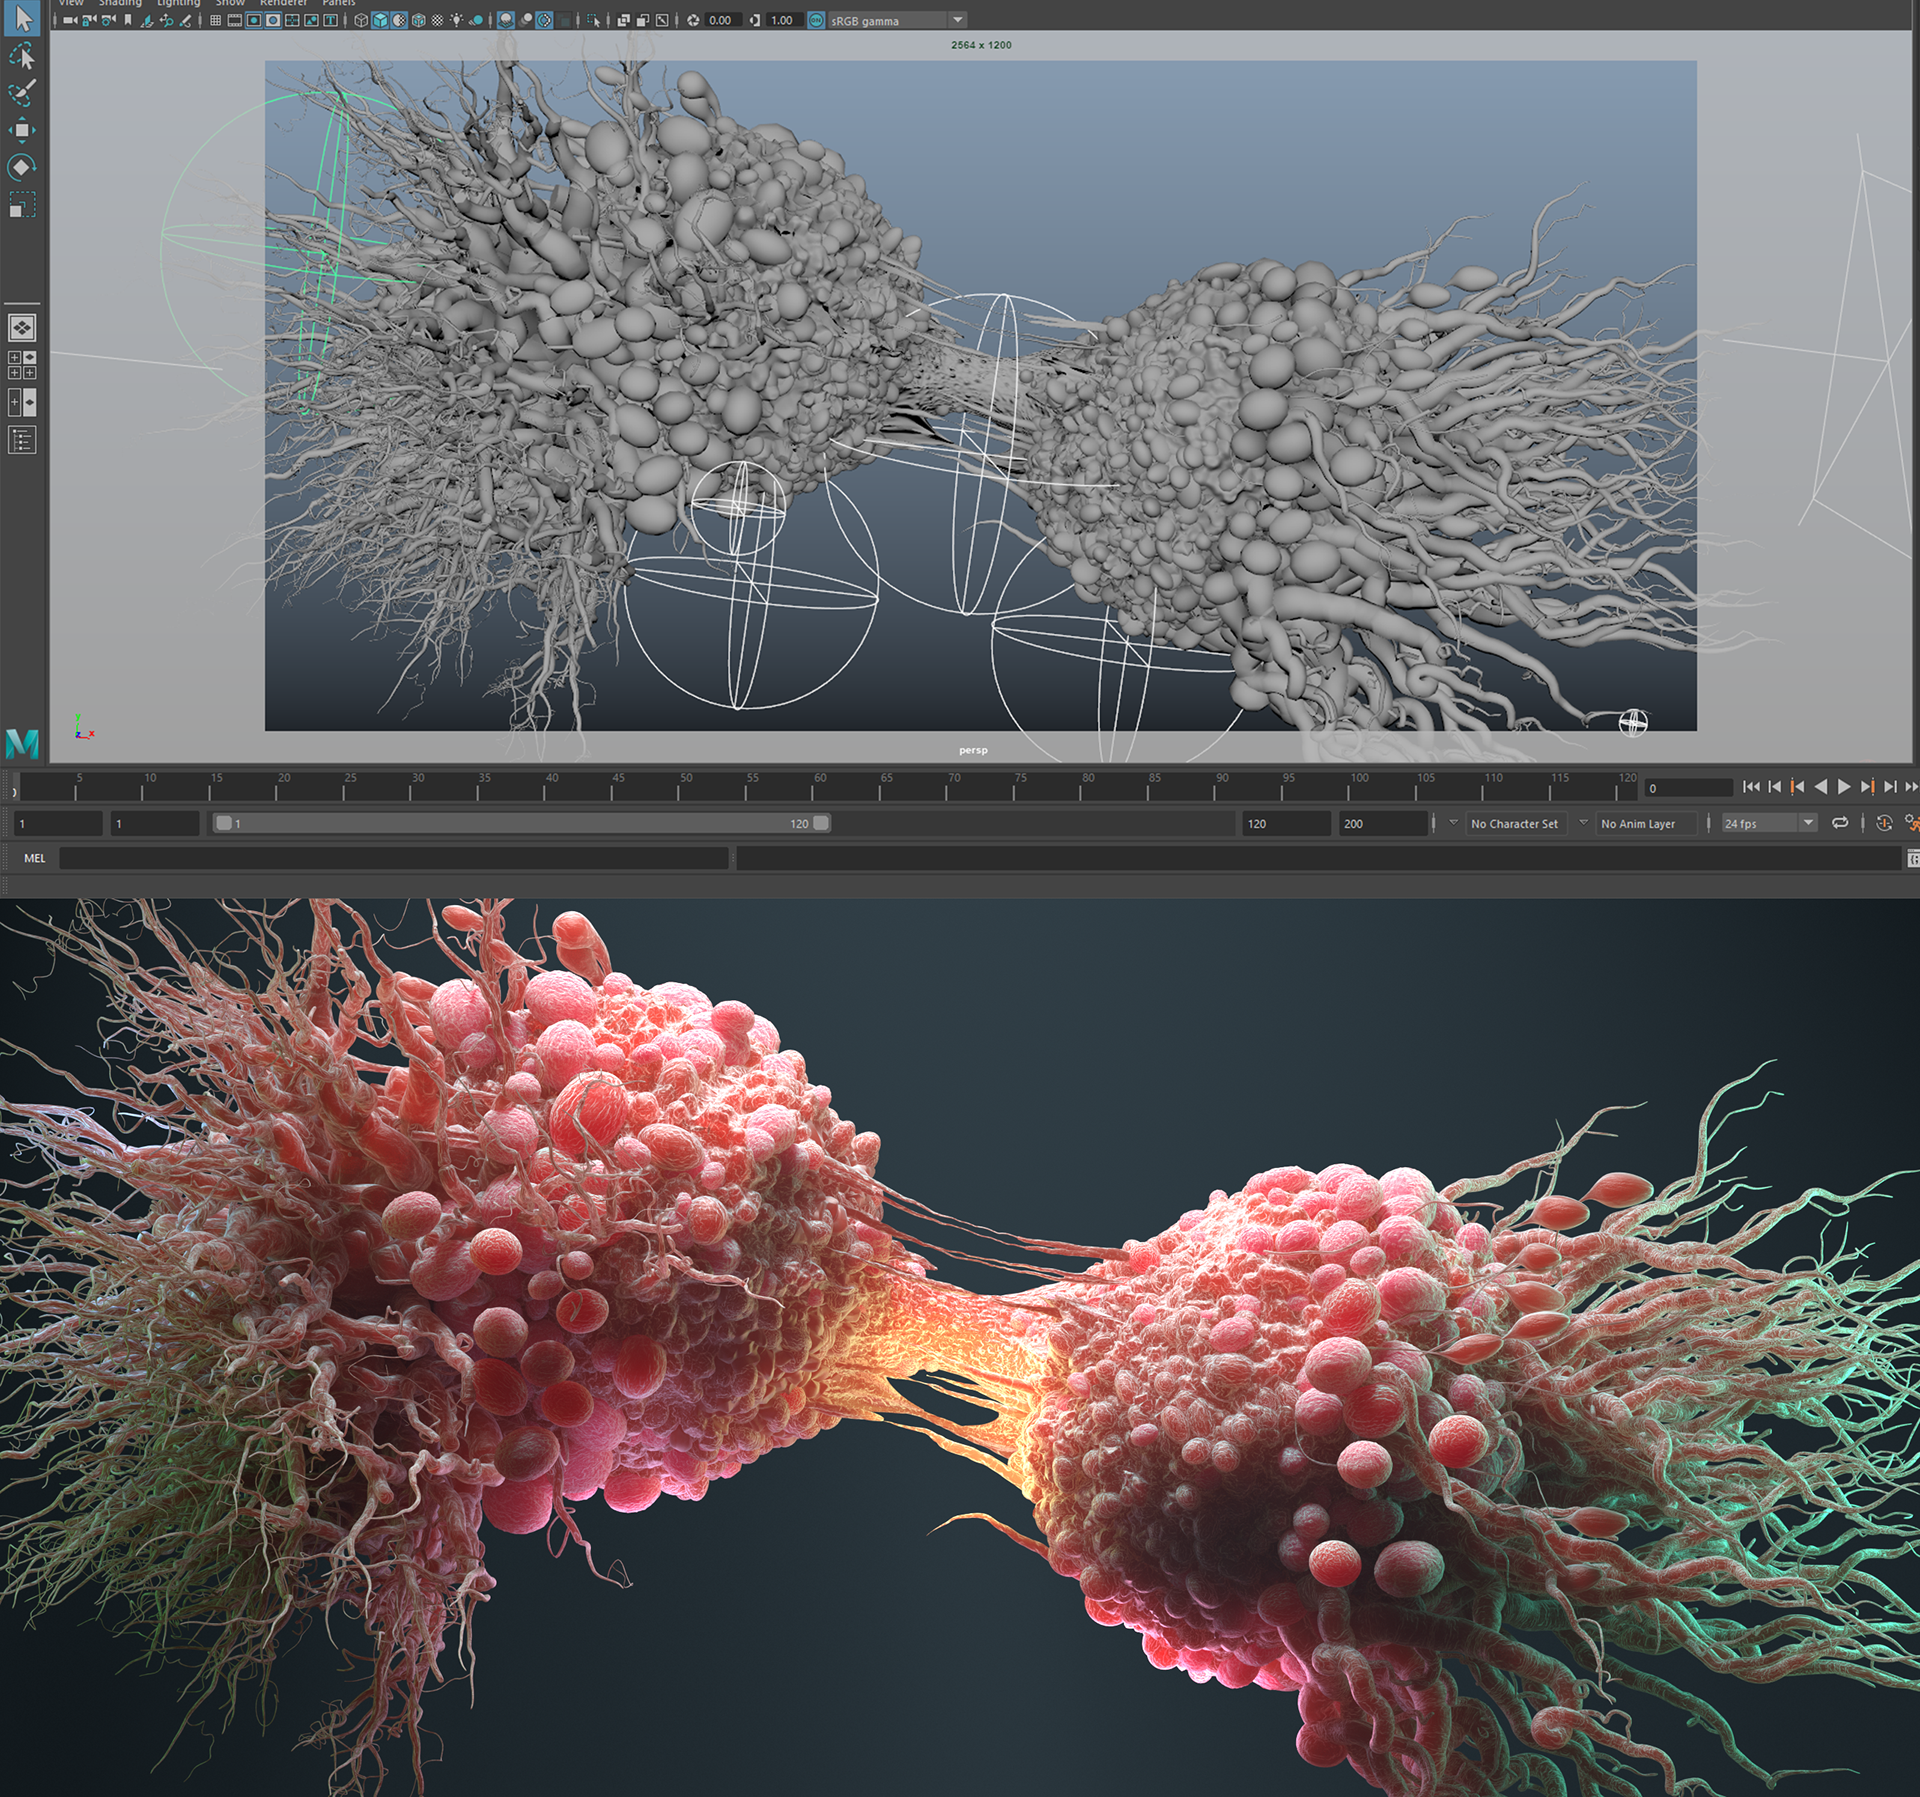 Cancer Cell Division on Behance95632b77860021.5c93c1e6d6a1f.png